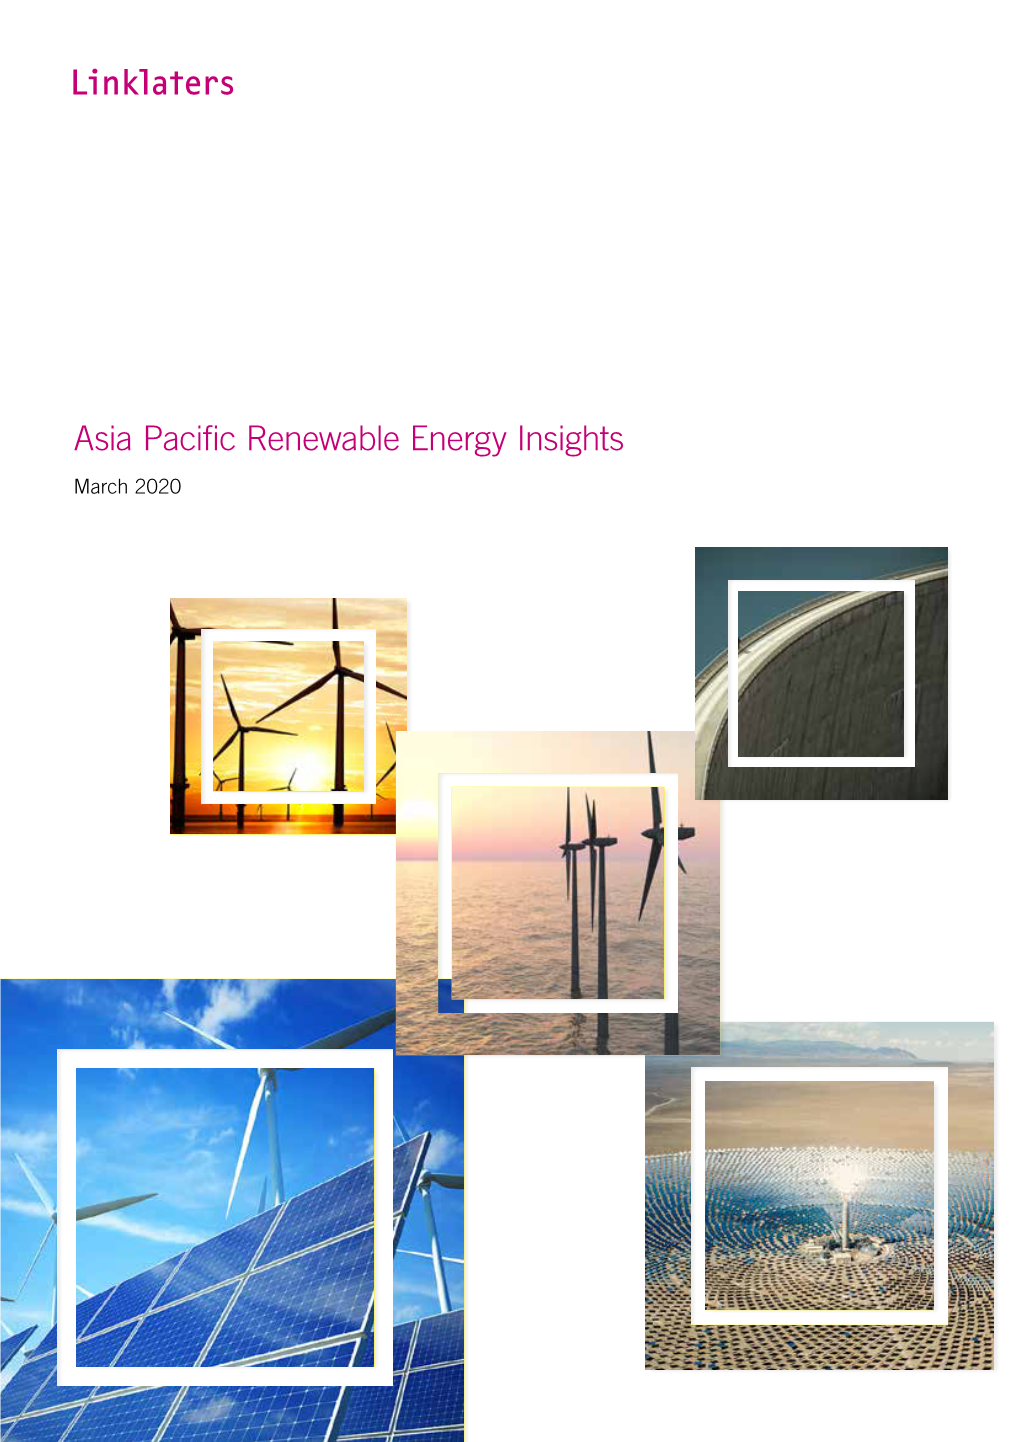 Asia Pacific Renewable Energy Insights March 2020 Table of Contents